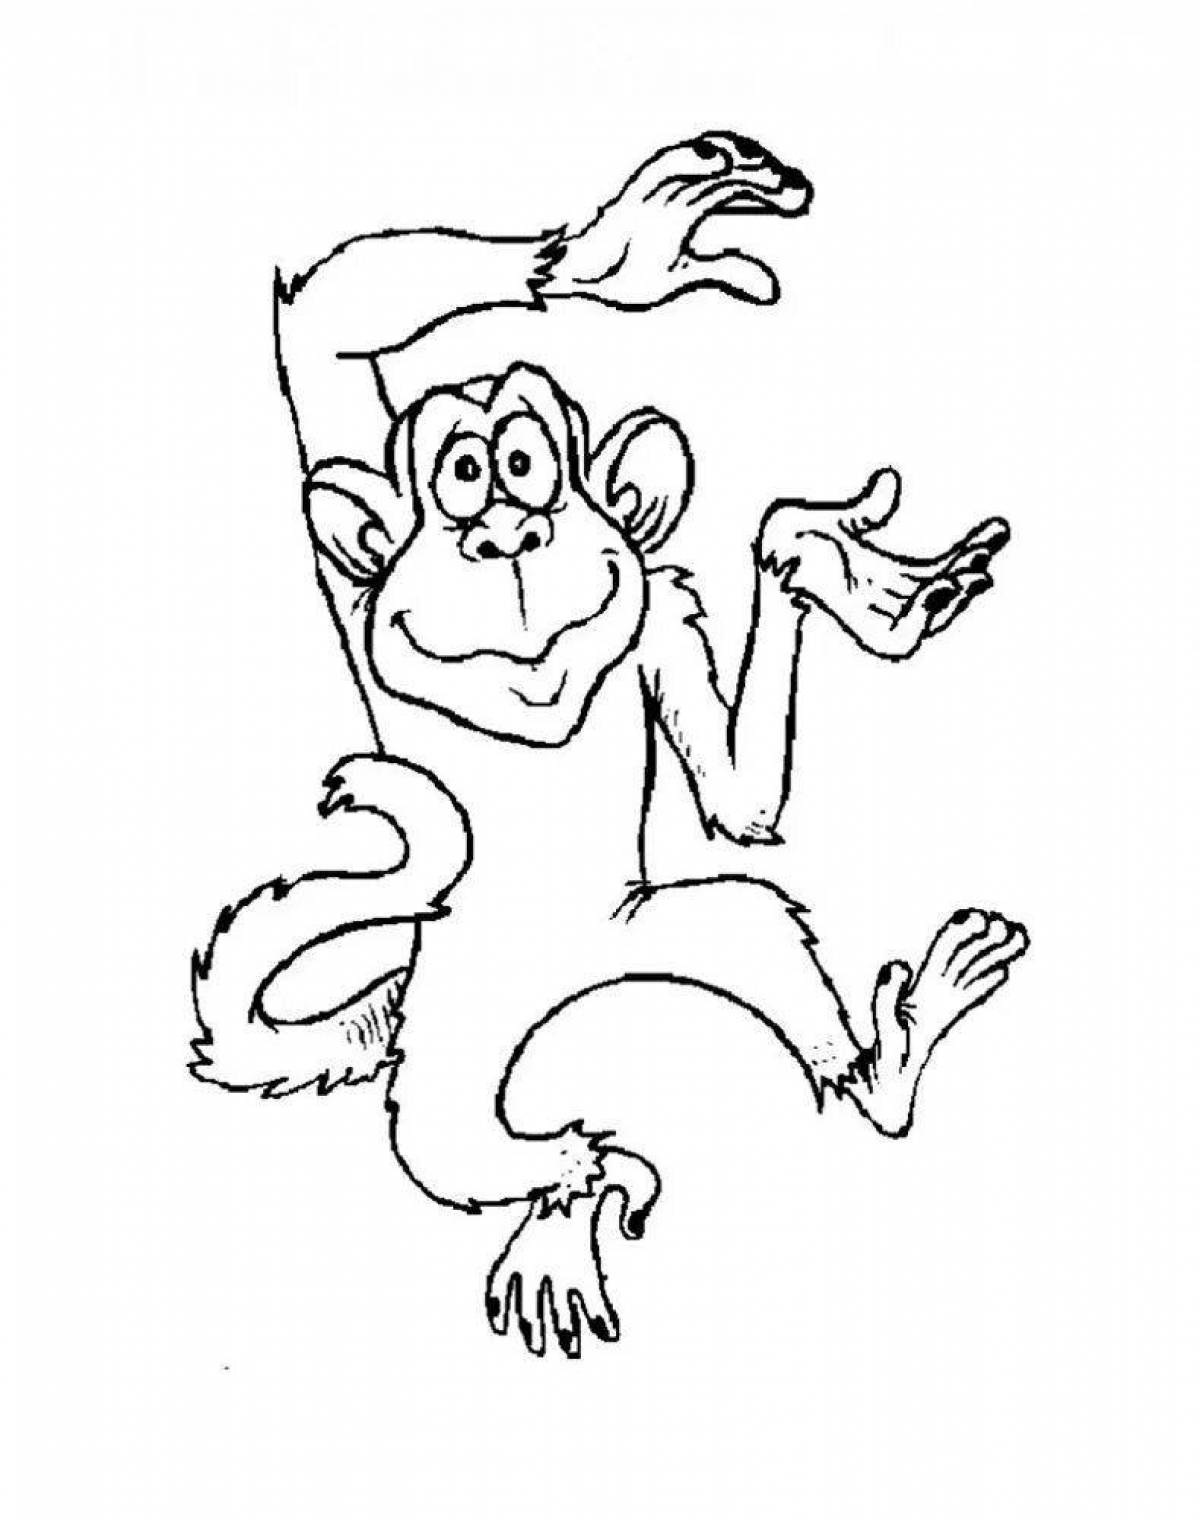 Zhitkov quirky monkey coloring page